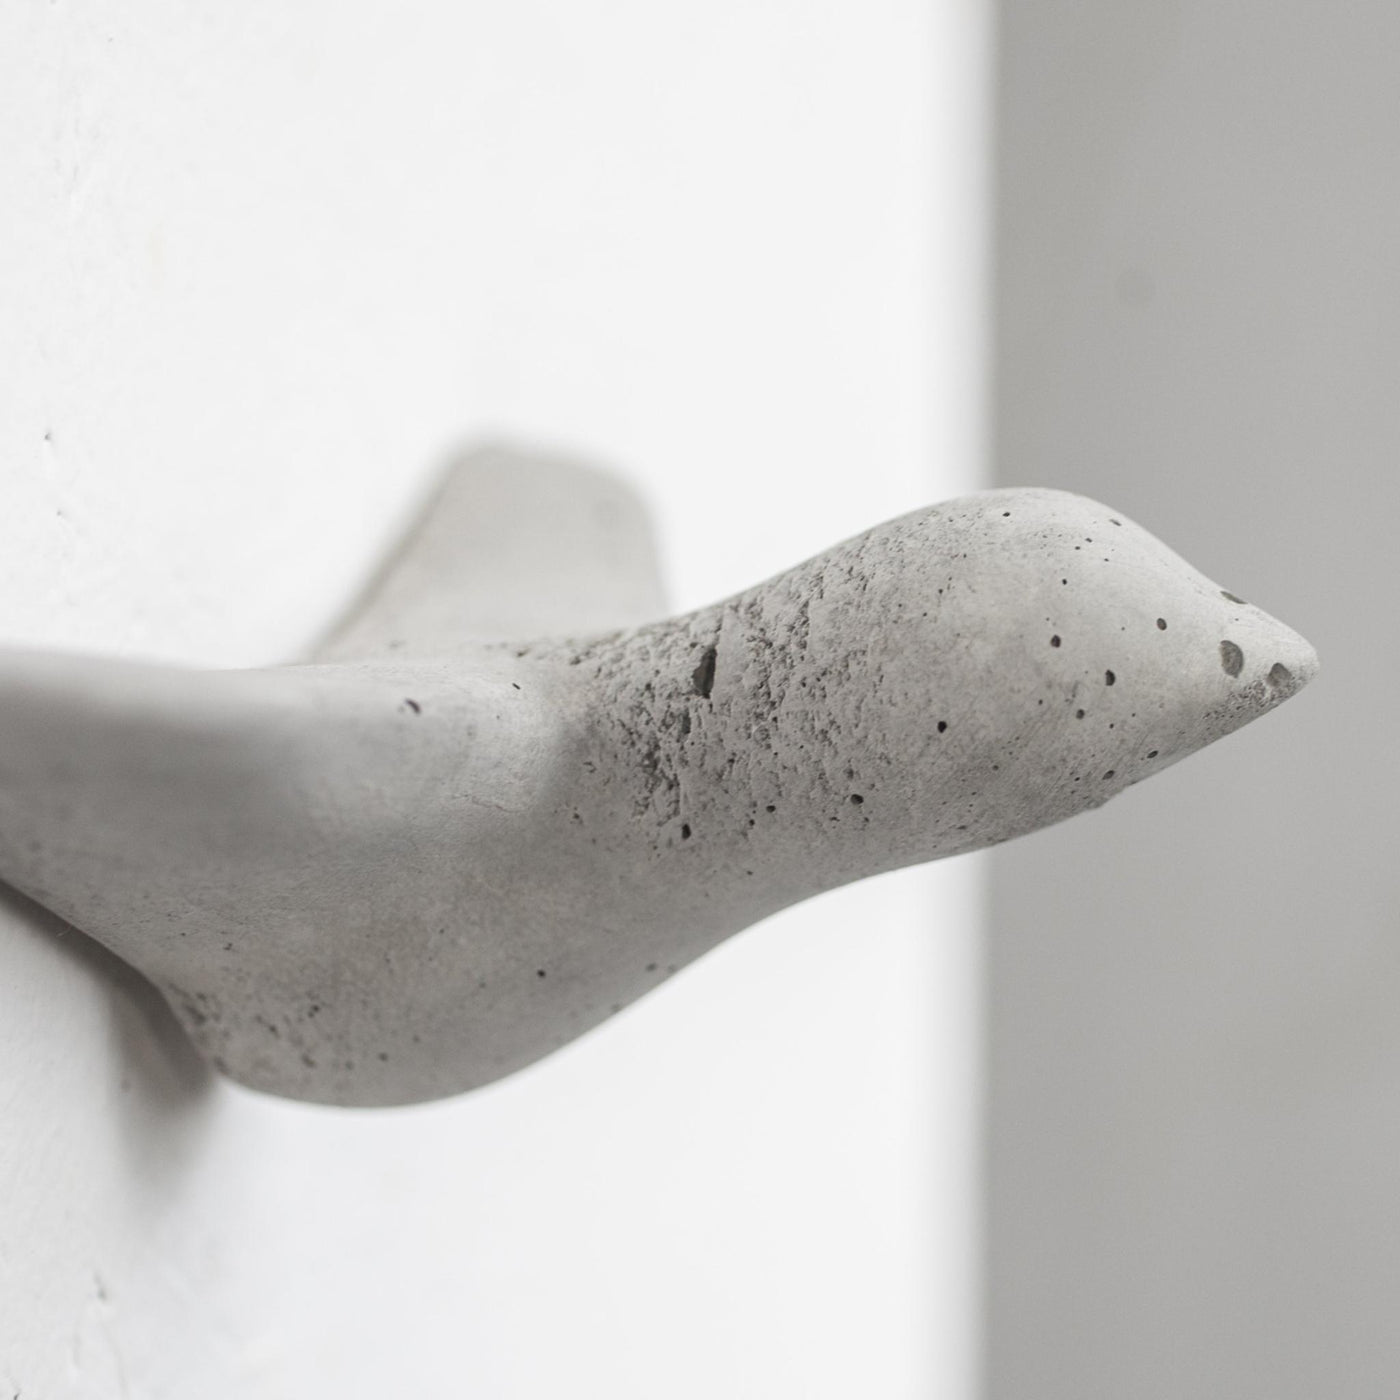 Grey Excursion Bird Wall Hanger-Wall Decor-CERAMIC, CONCRETE, STONE, WALL HANGERS-Forest Homes-Nature inspired decor-Nature decor